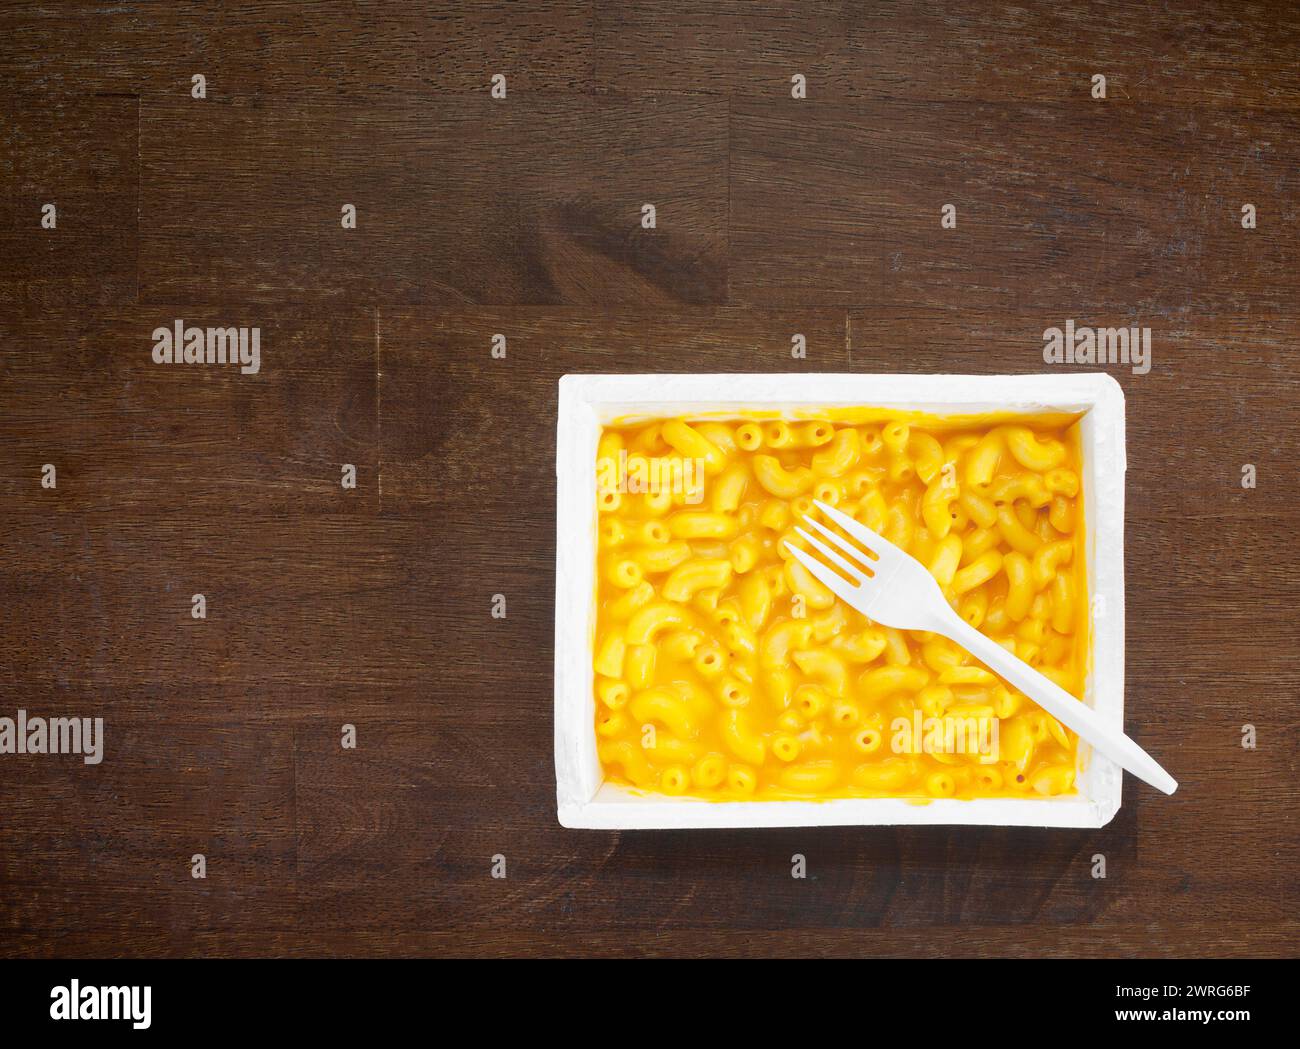 Ready to eat macaroni and cheese microwave dinner and plastic fork Stock Photo